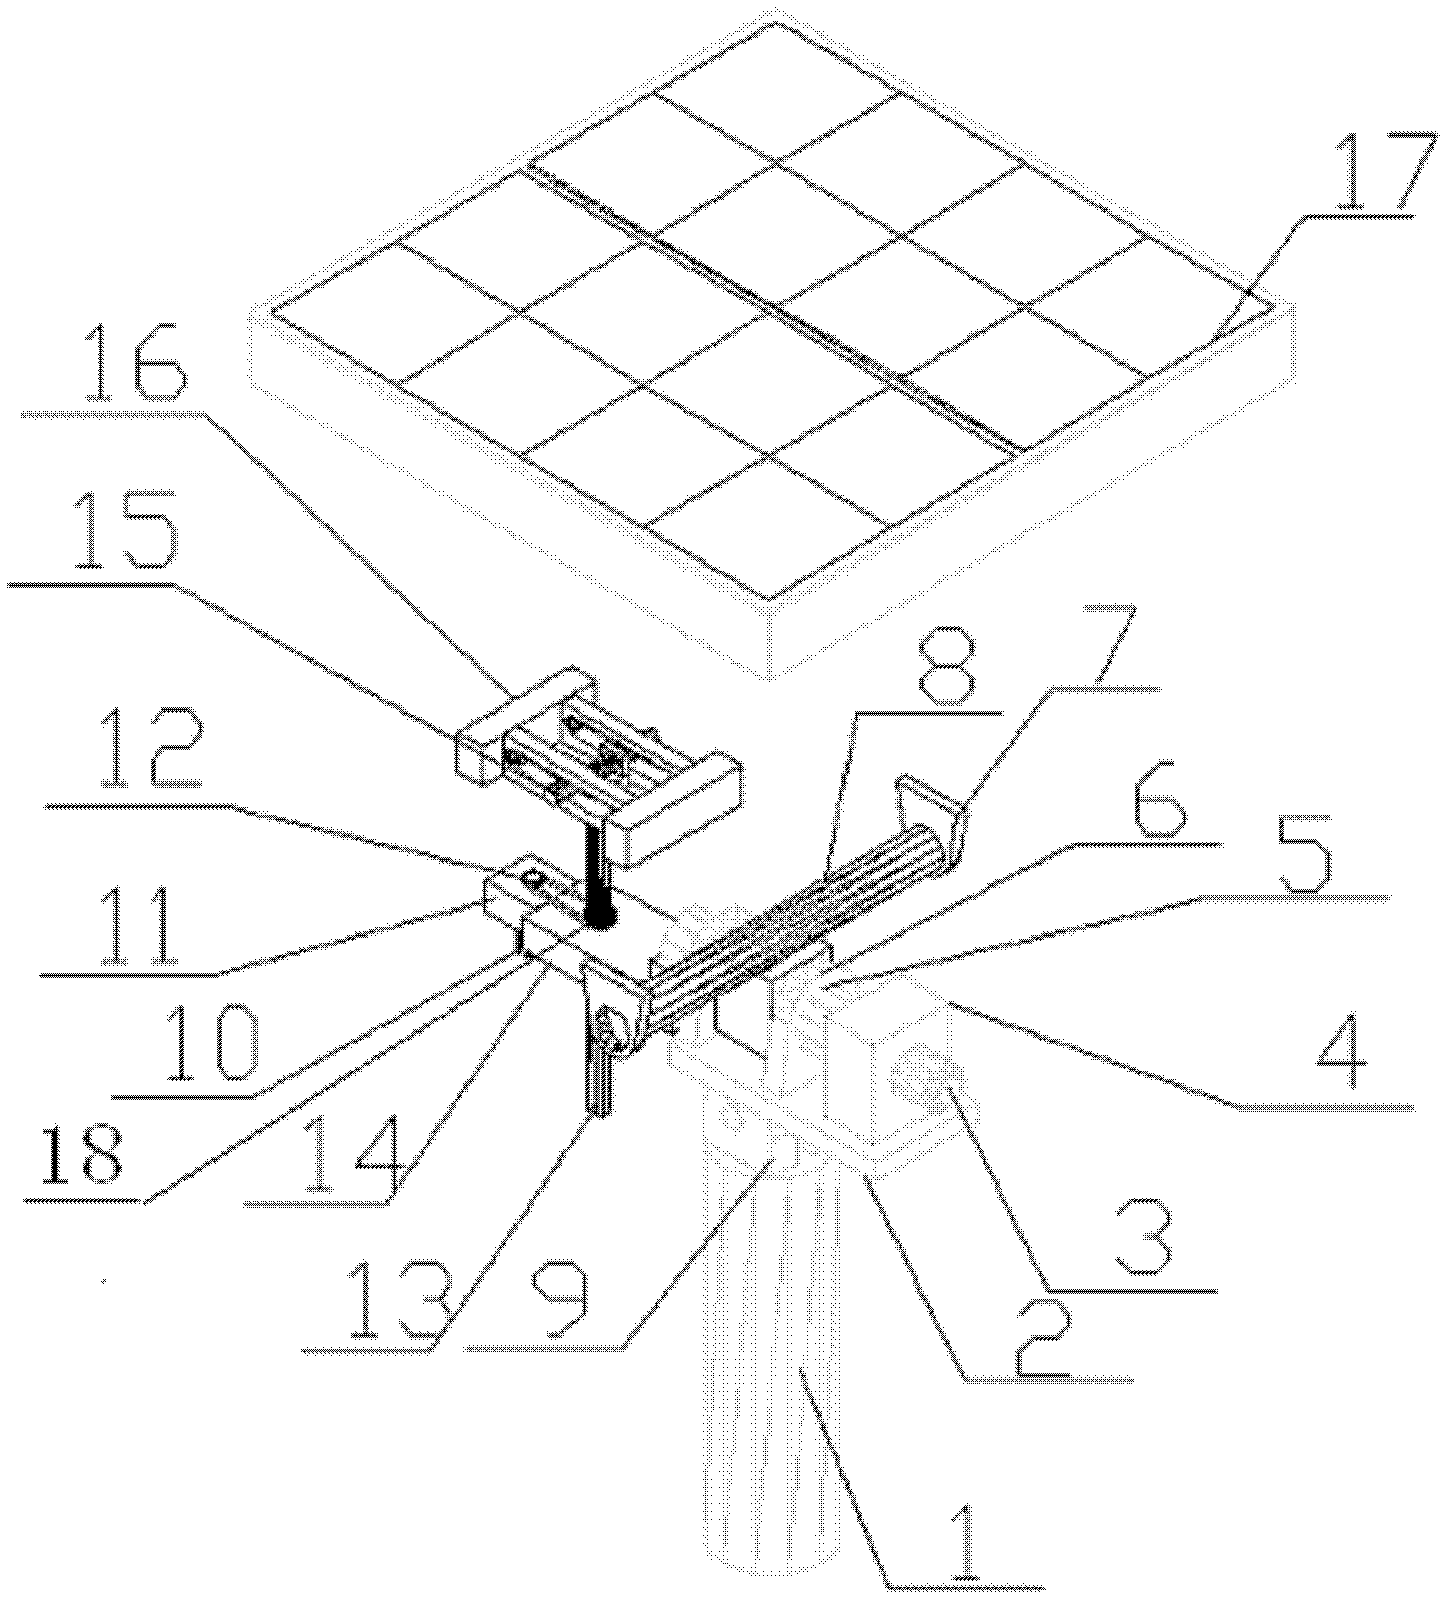 Photovoltaic panel tracking device with high tracking precision